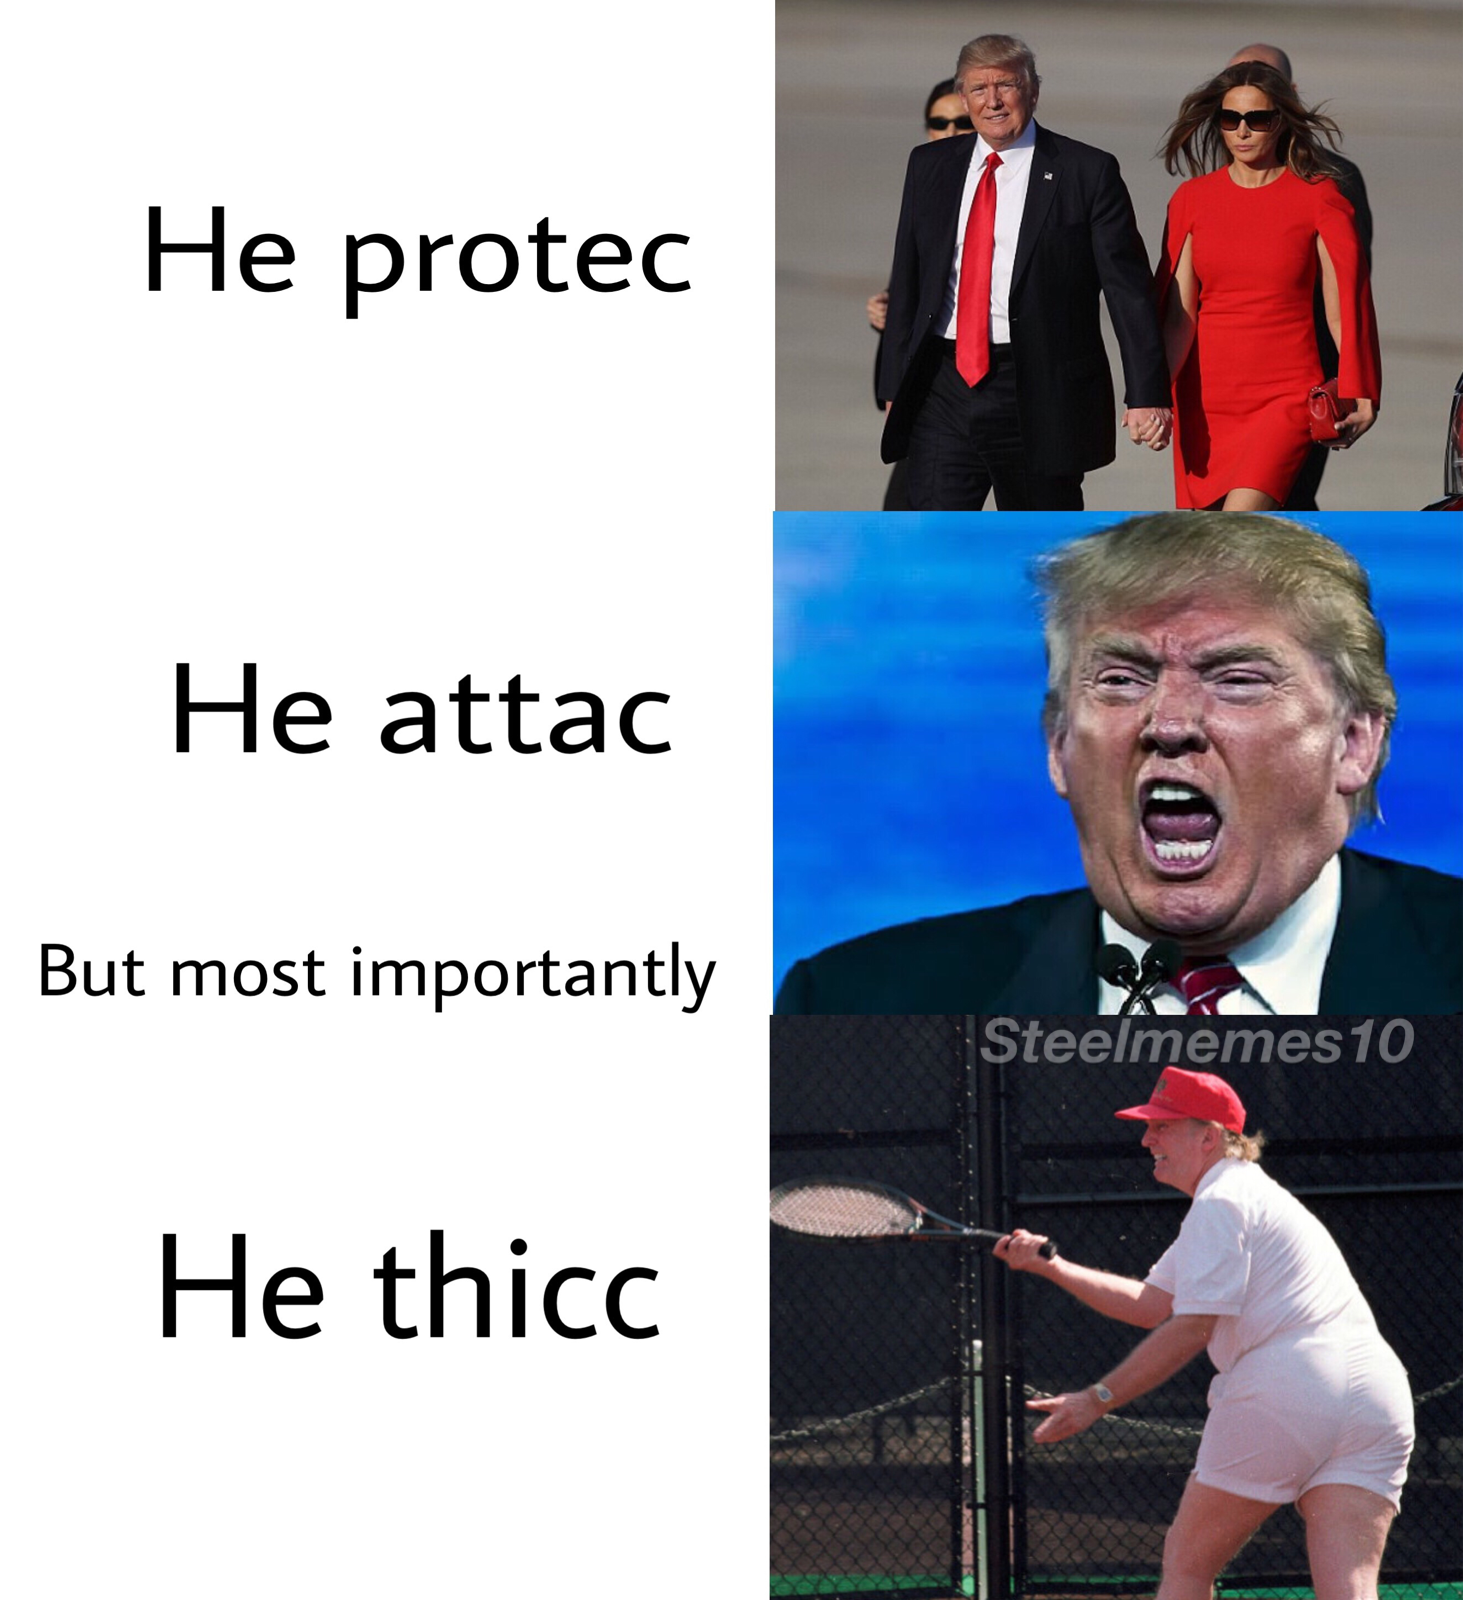 he attac he protec he thicc - He protec He attac But most importantly Steelmemes 10 He thicc